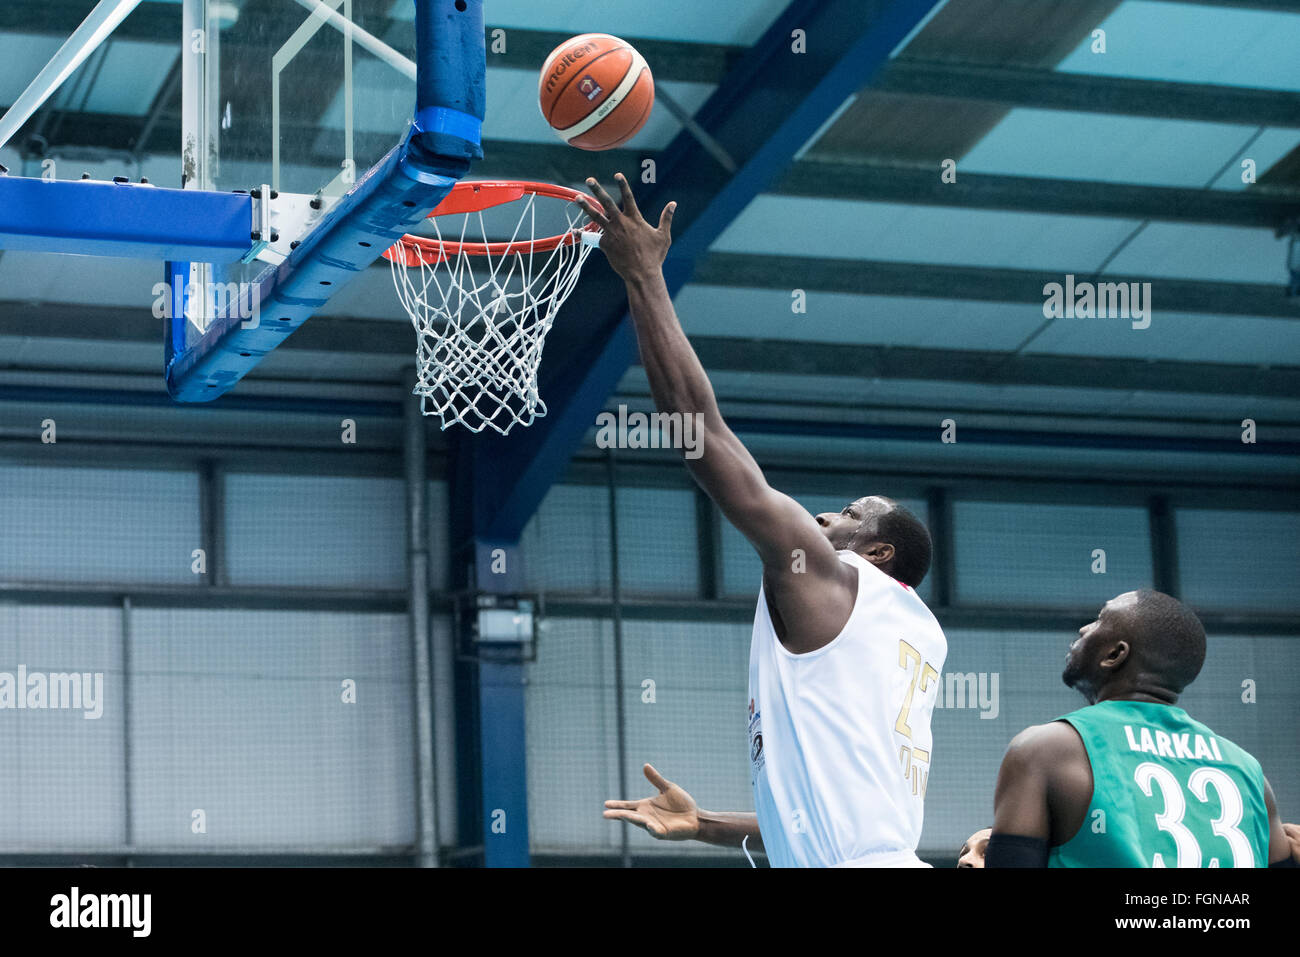 Manchester, England, 21 February 2016. London Lion's vs Manchester Giants at Lucozade Sportsdome. London Lions Olumide Oyedeji (00) shooting a hoop while Manchester Giants Dzaflo Larkai (33) looks on.  Credit:  pmgimaging/Alamy Live News Stock Photo